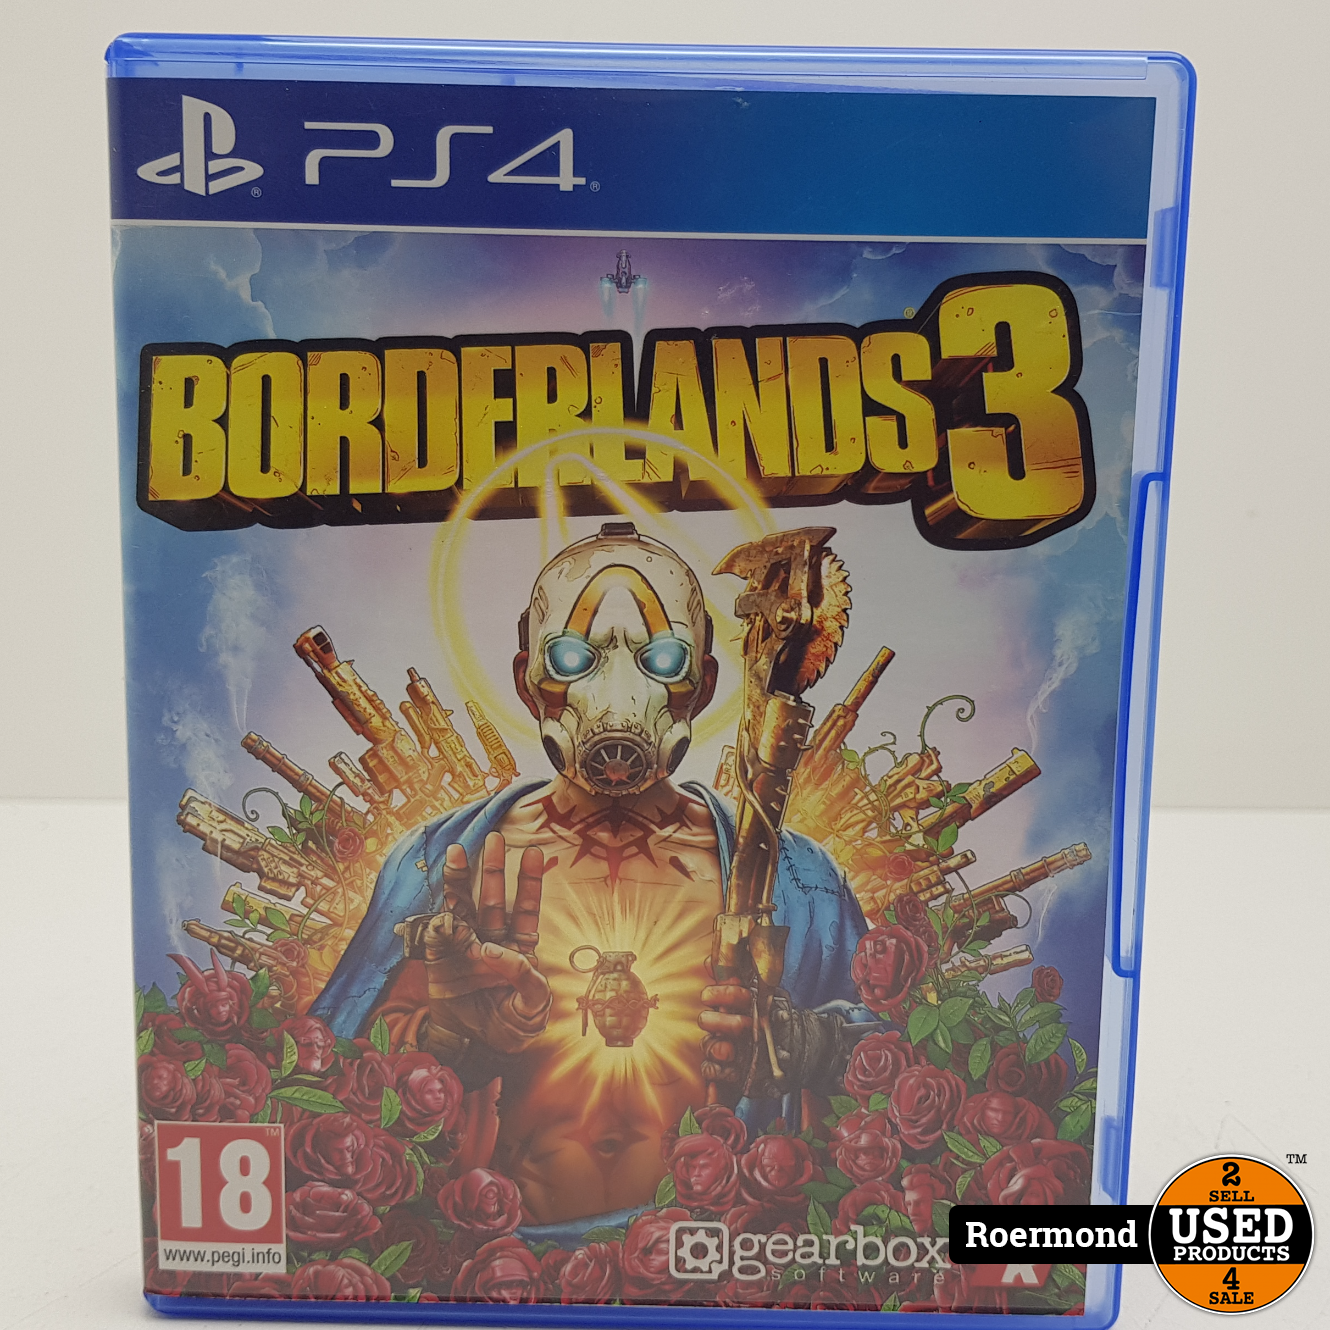 Playstation Borderlands 3 Game - Used Products Roermond